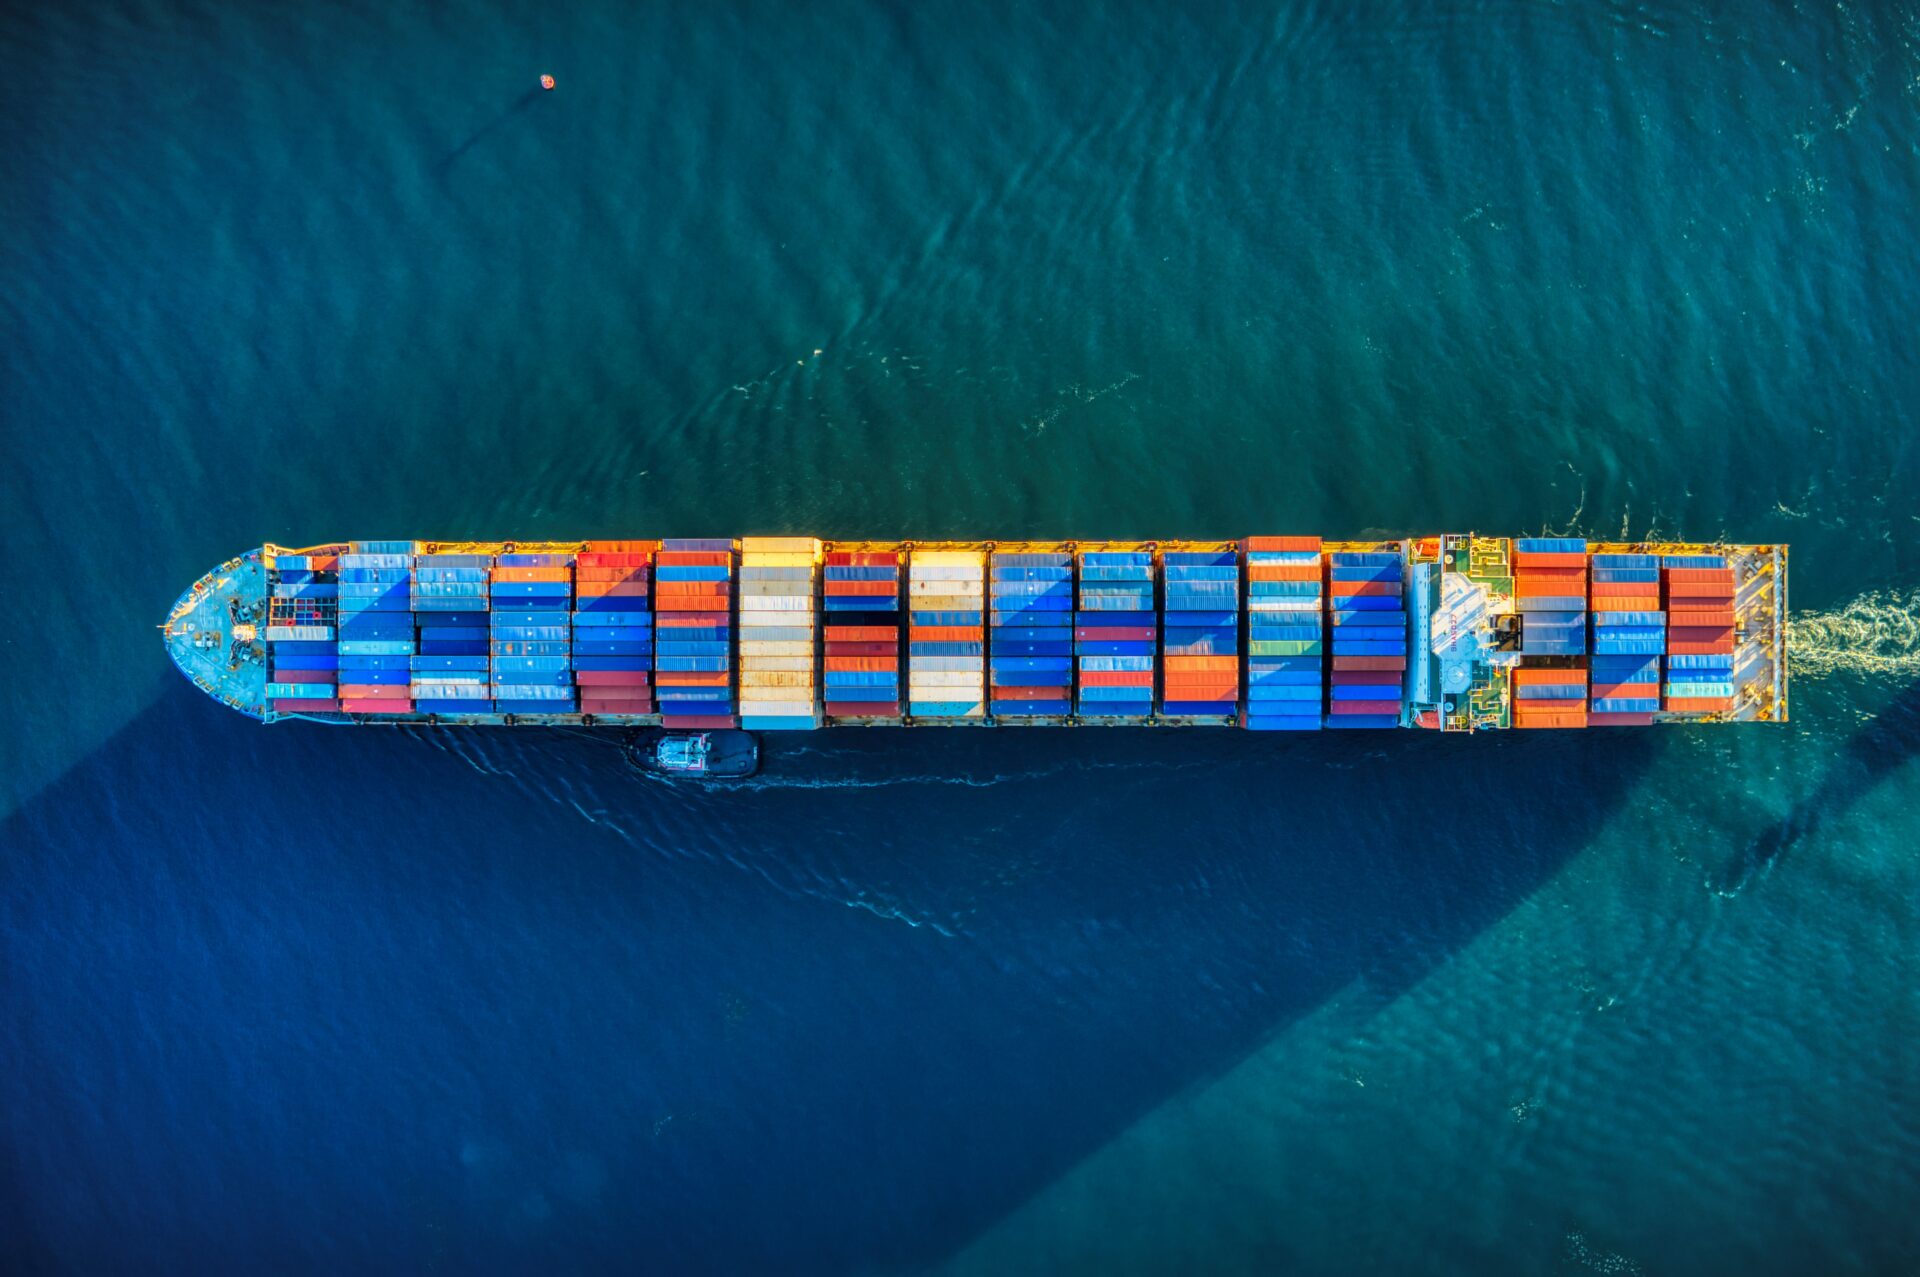 ariel view of shipping containers on a ship